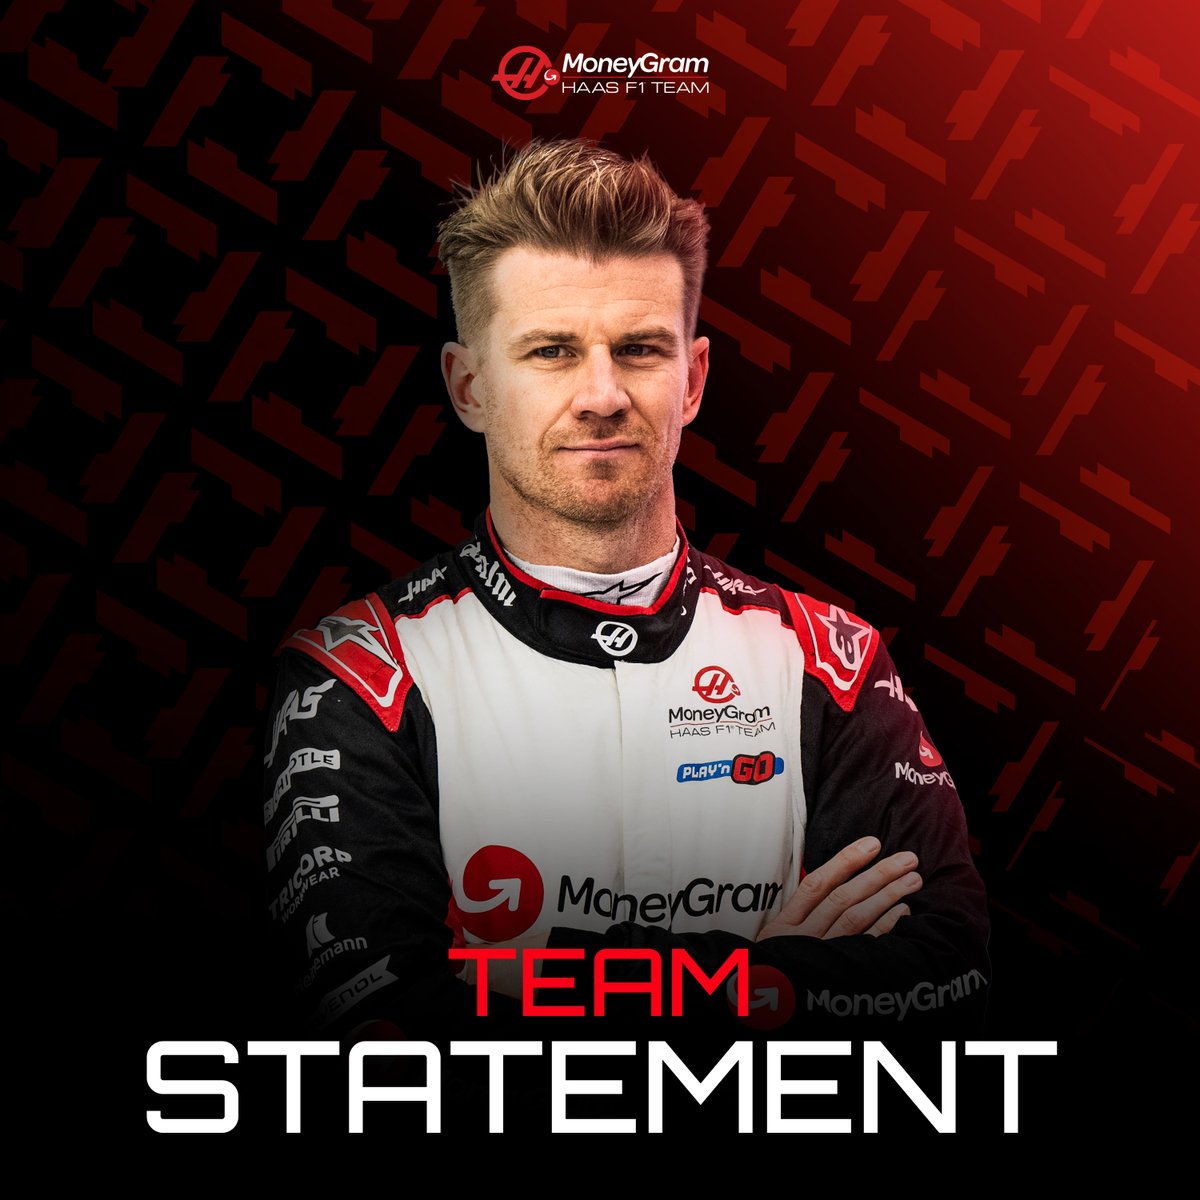 MoneyGram Haas F1 Team and Nico Hulkenberg will part ways at the conclusion of the 2024 FIA Formula 1 World Championship. #HaasF1